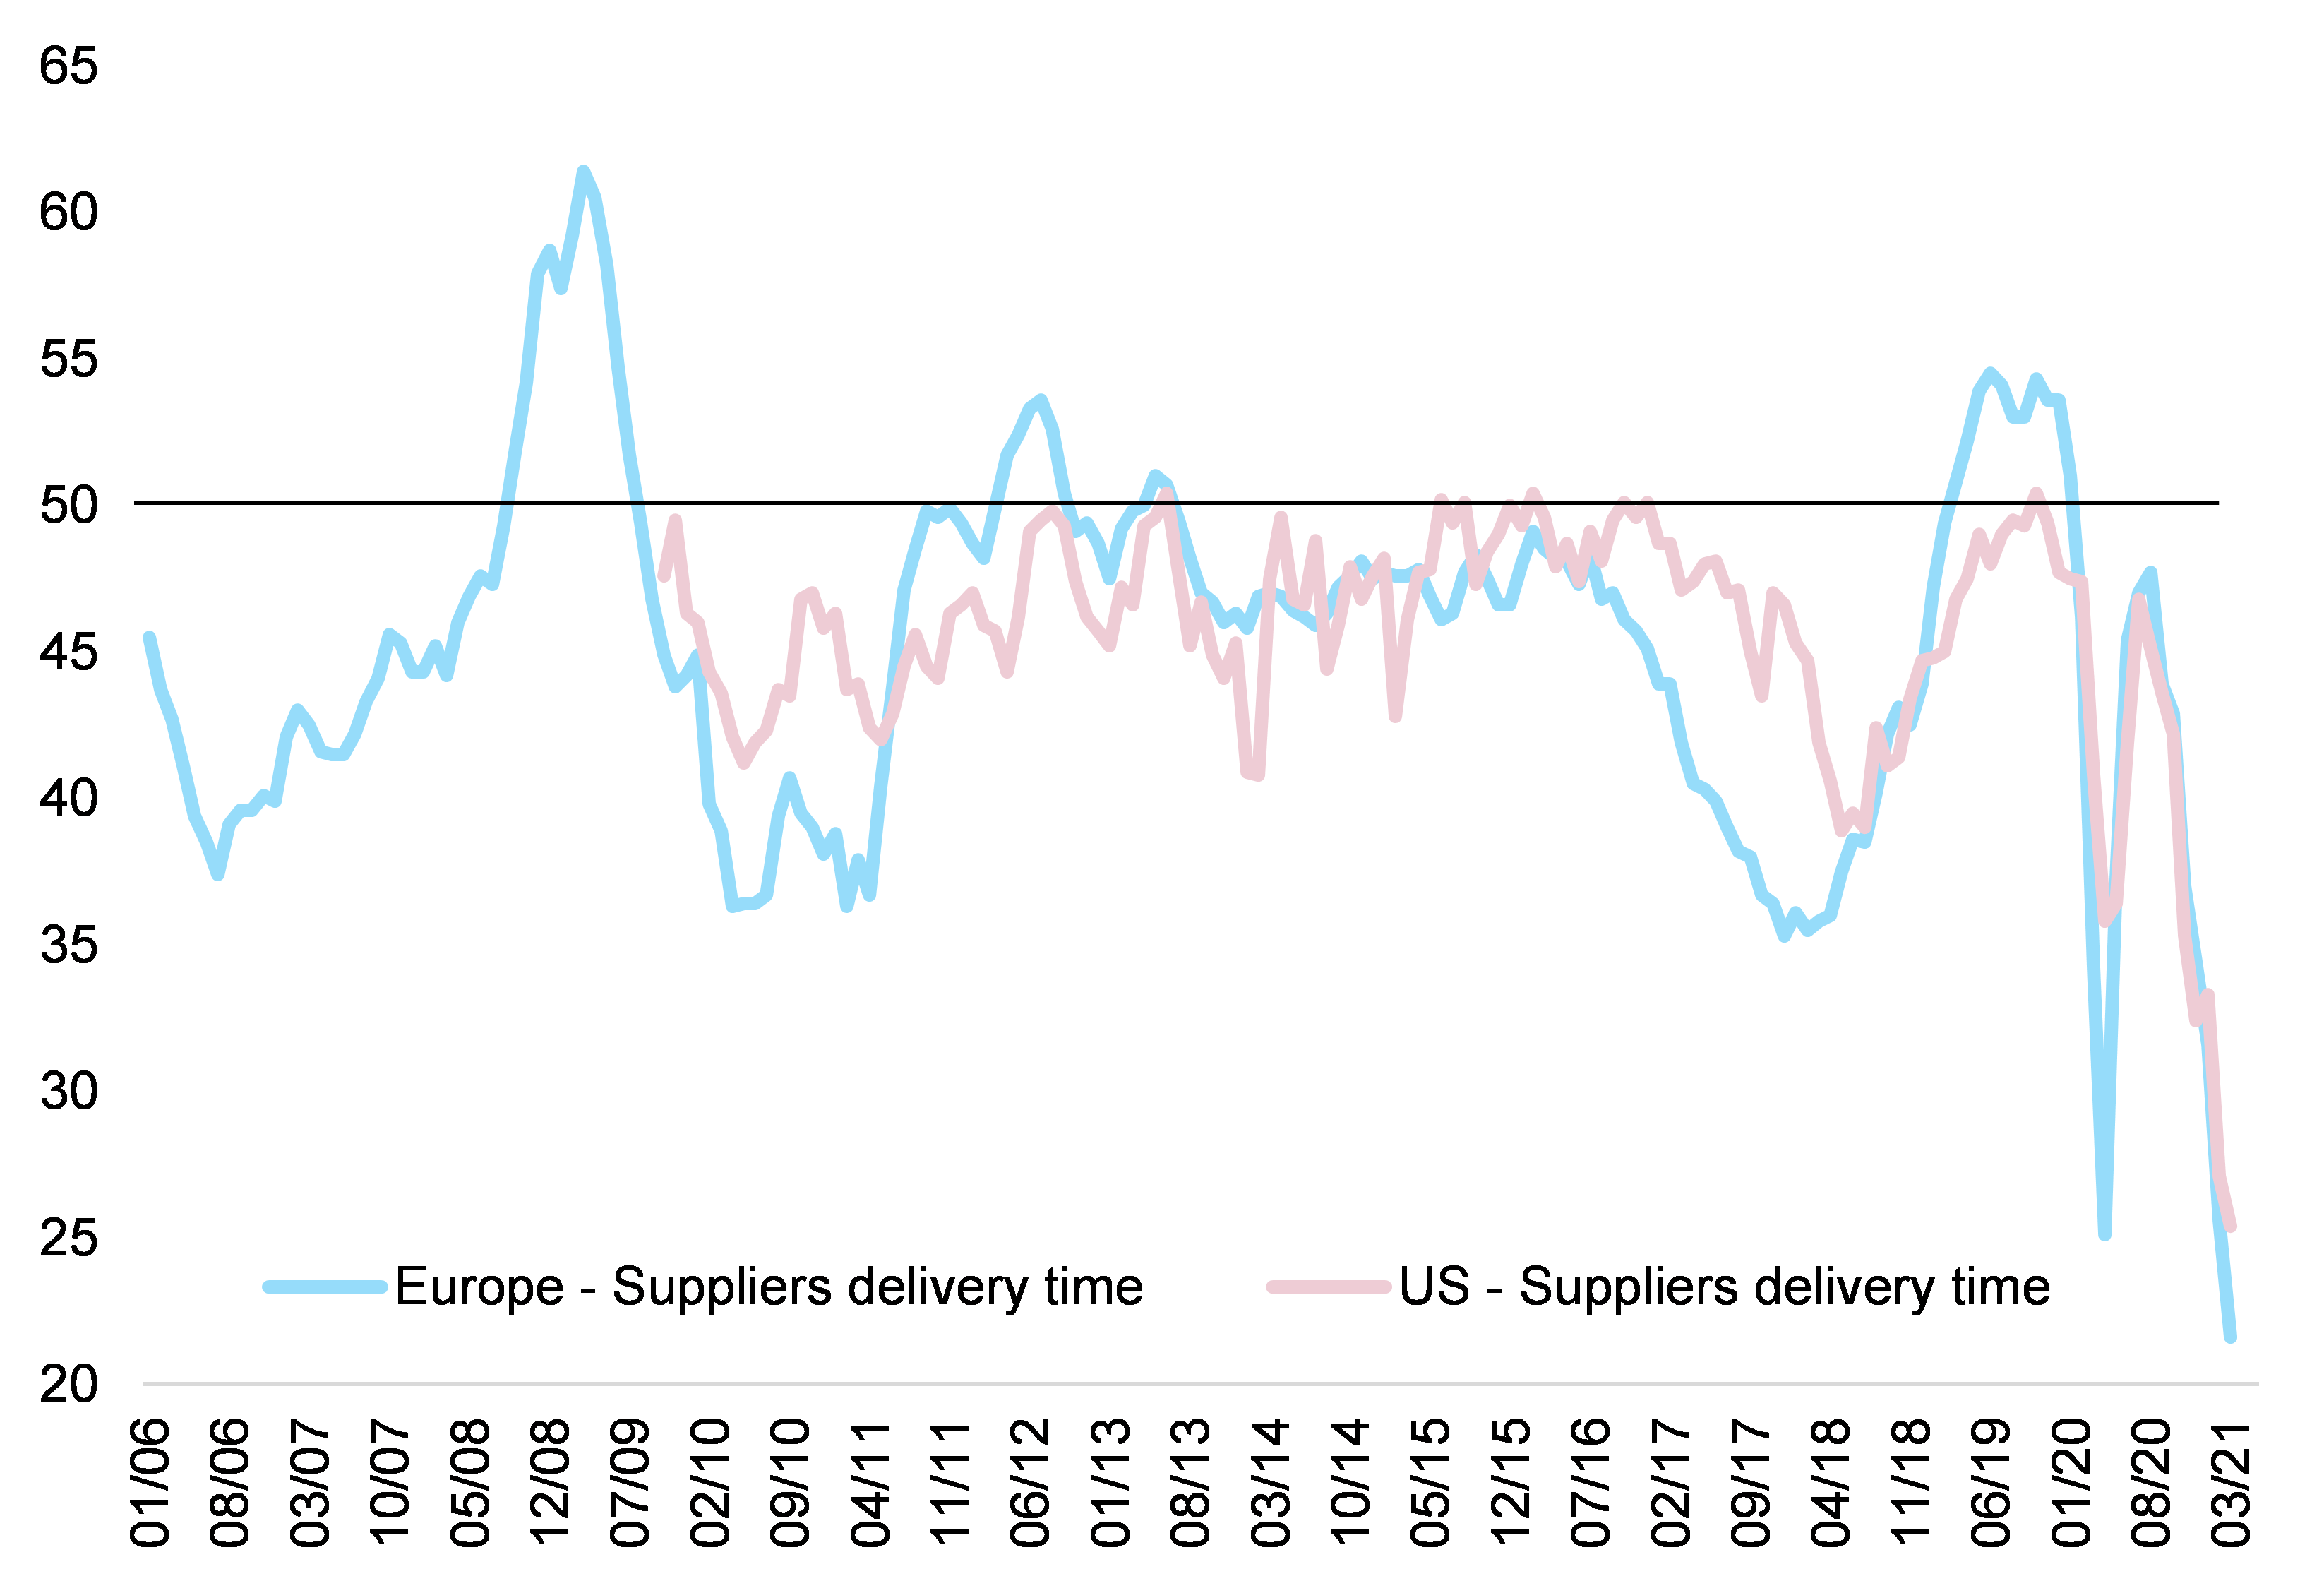  Figure 1 – Suppliers’ delivery times in the manufacturing sector (the lower the index, the longer the delivery times)